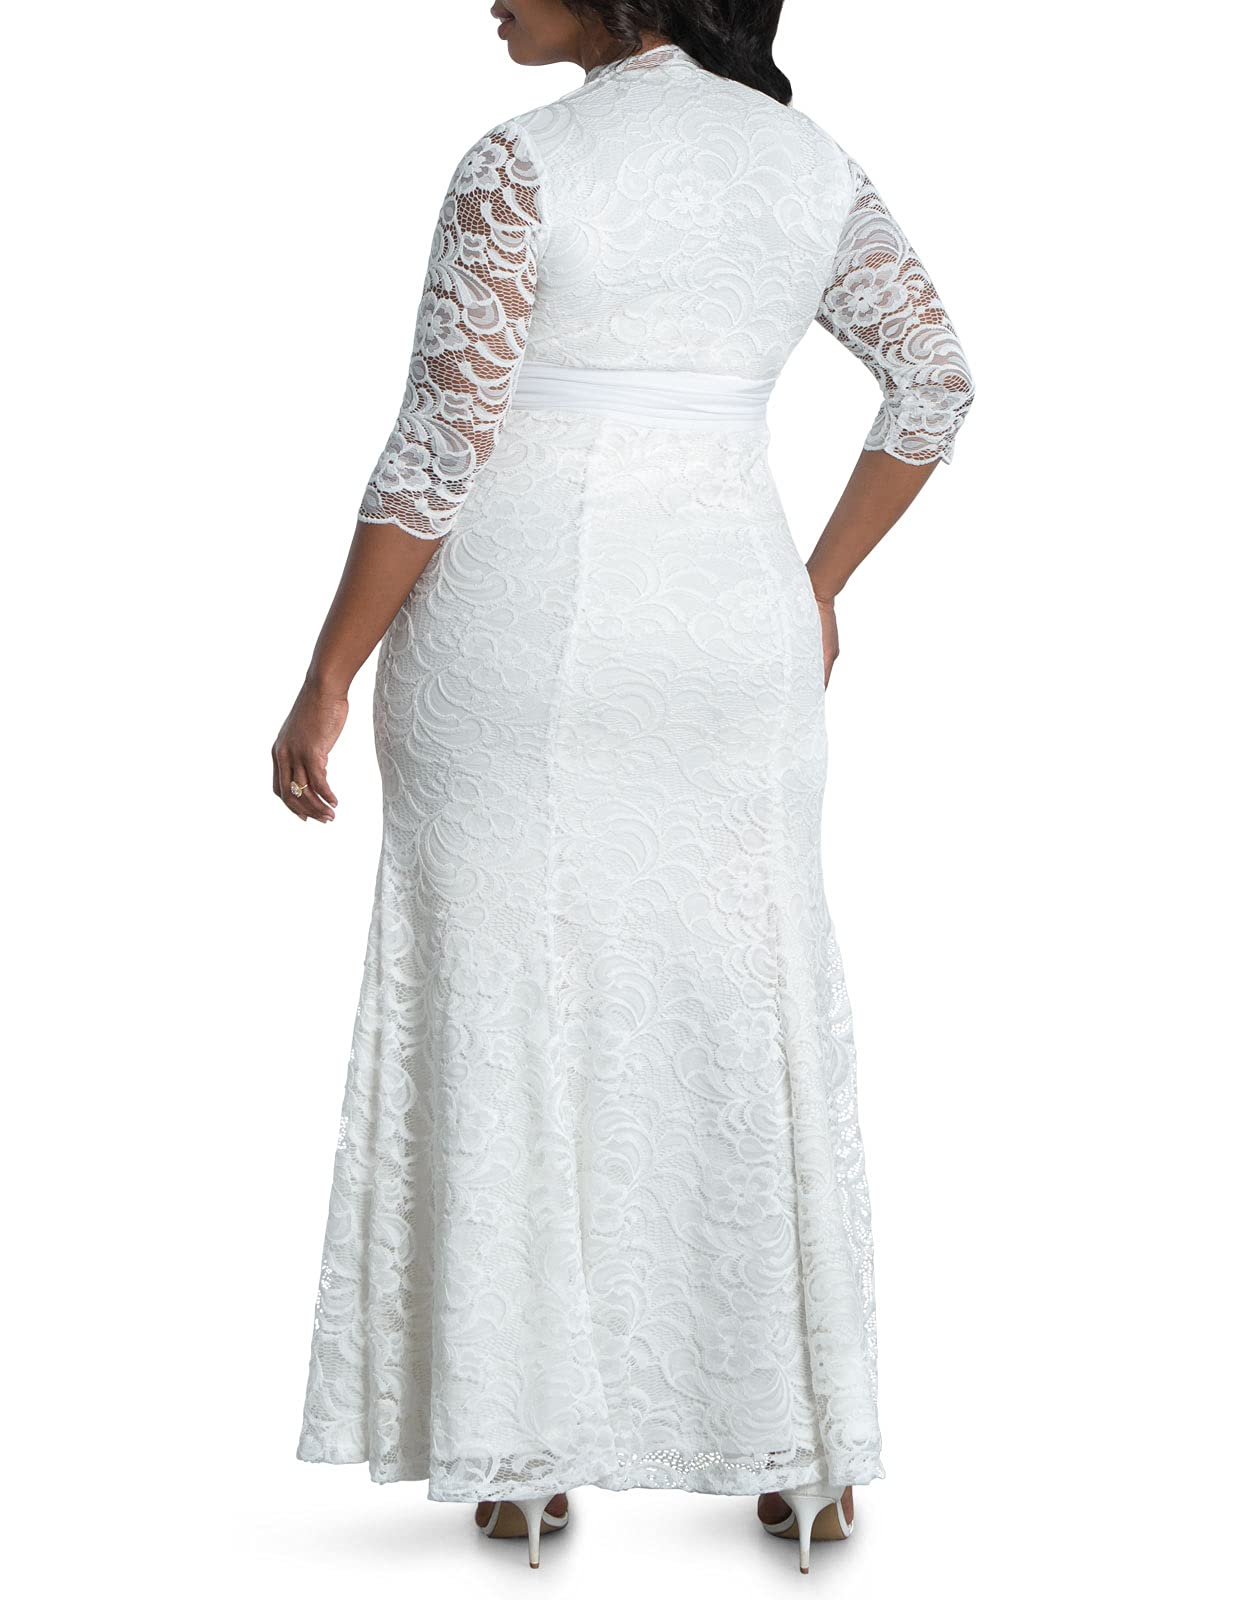 Kiyonna Women's Plus Size Amour Long Lace Wedding Gown, Bridal Dress with 3/4 Long Sleeves in Ivory Vintage-Inspired Lace